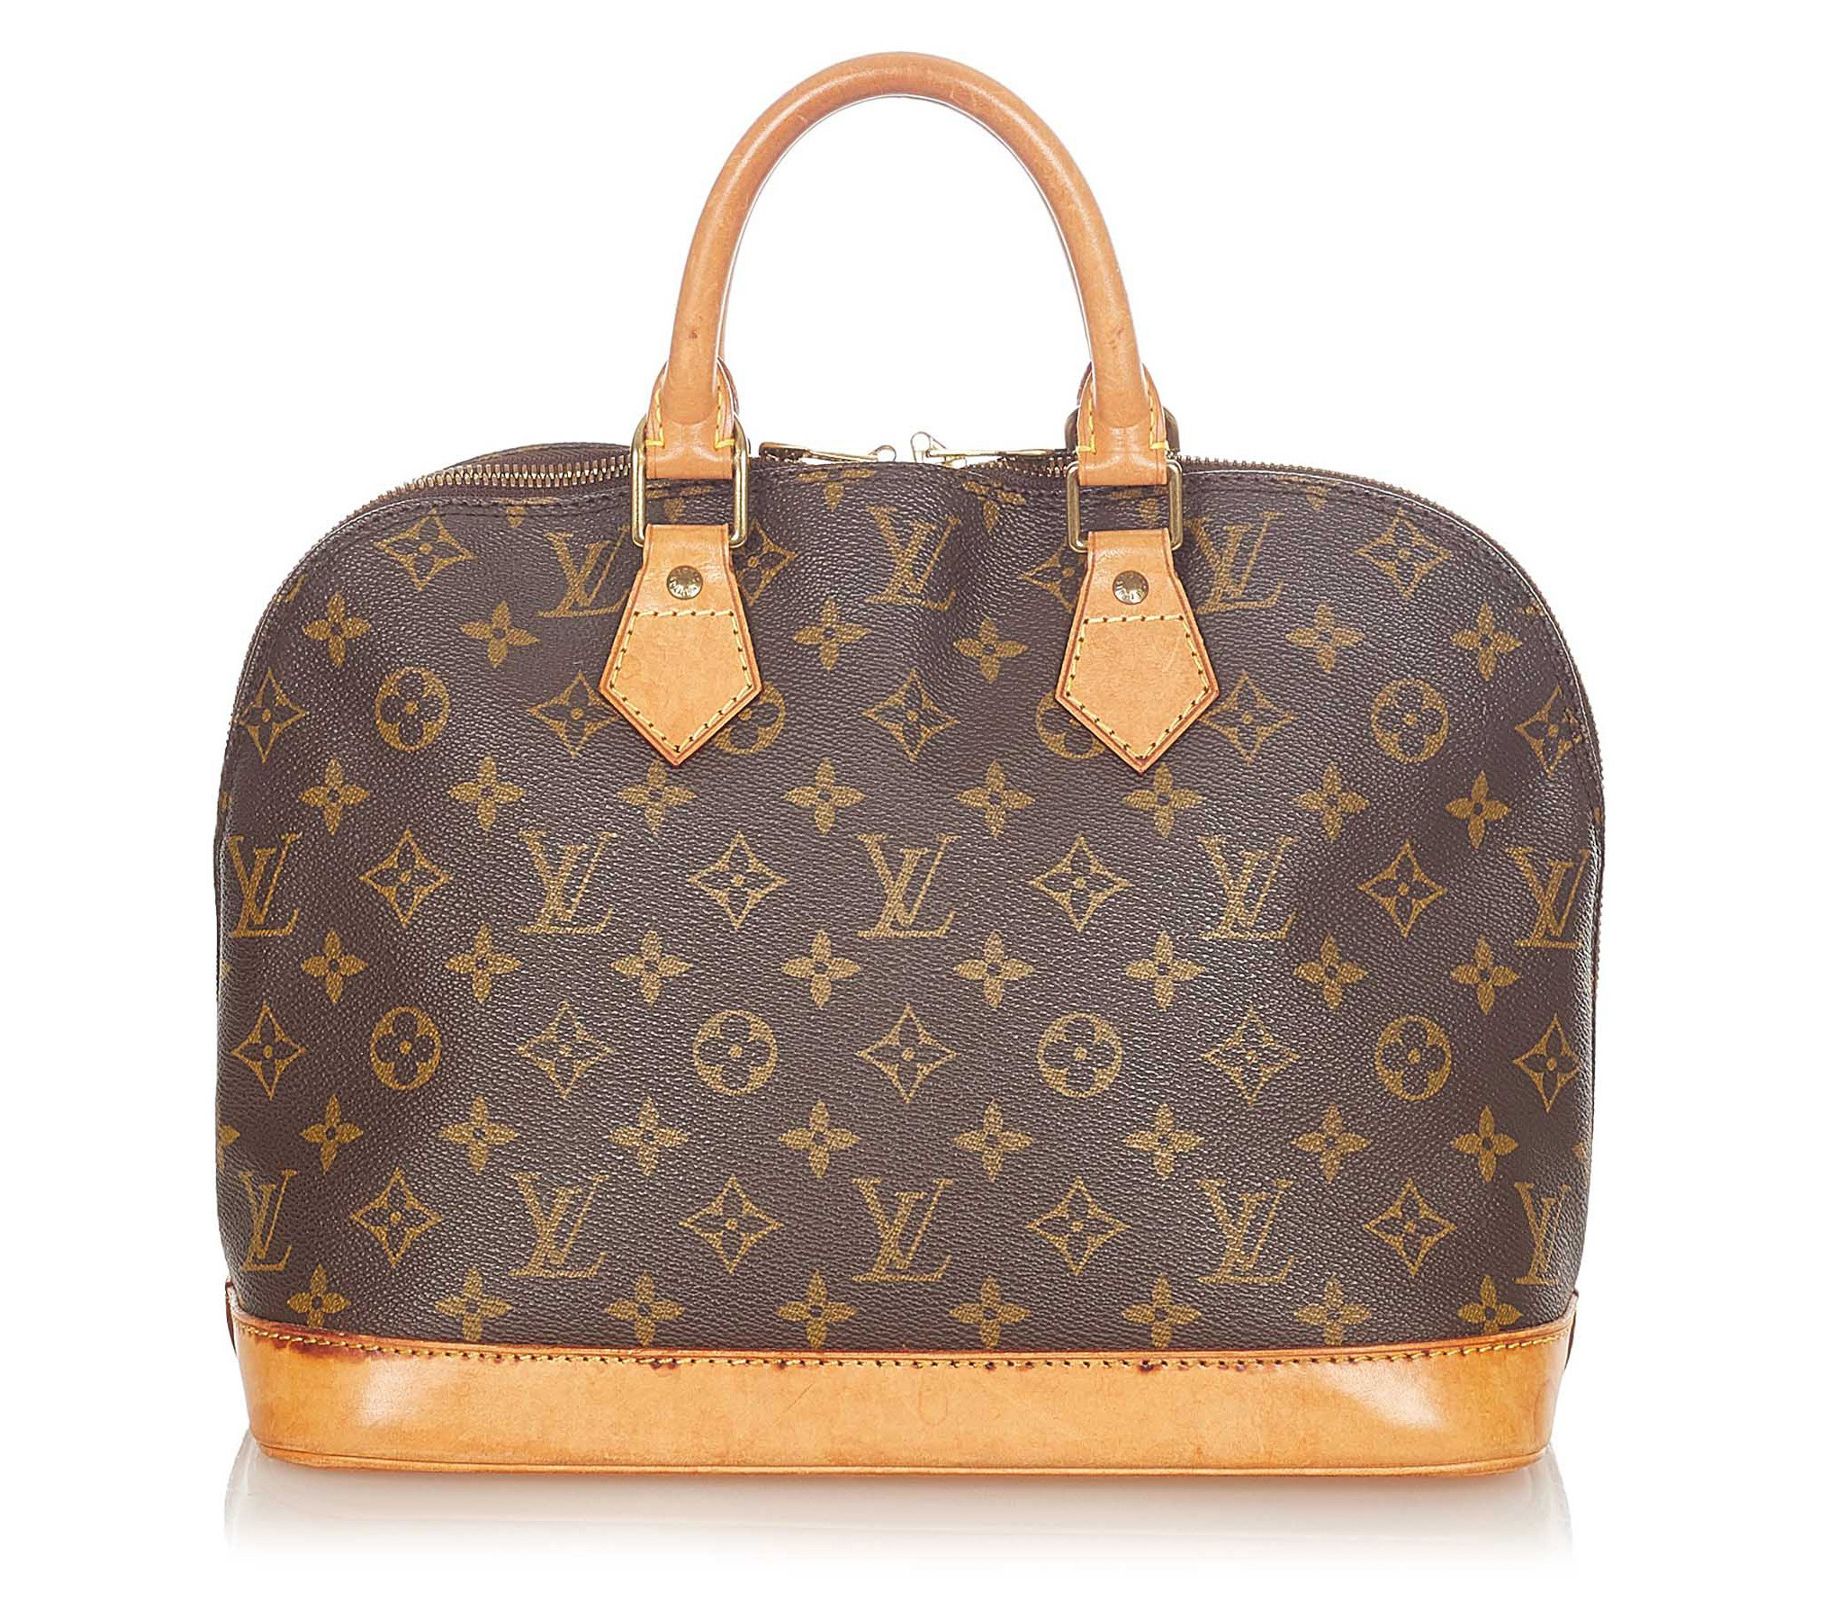 Louis Vuitton - Alma Bag water stain and some scratches!